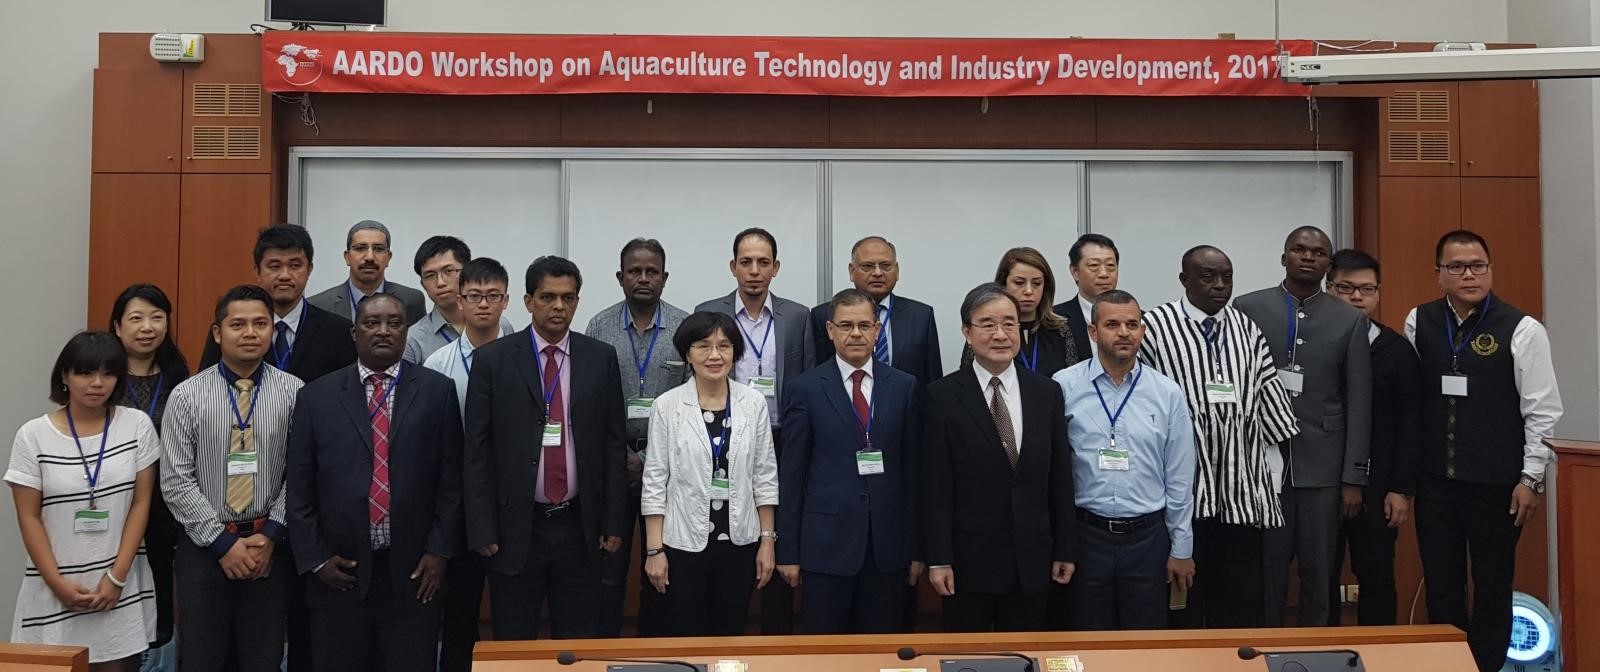 The African-Asian Rural Development Organization (AARDO) Workshop on Aquaculture Technology and Industry Development, 2017.